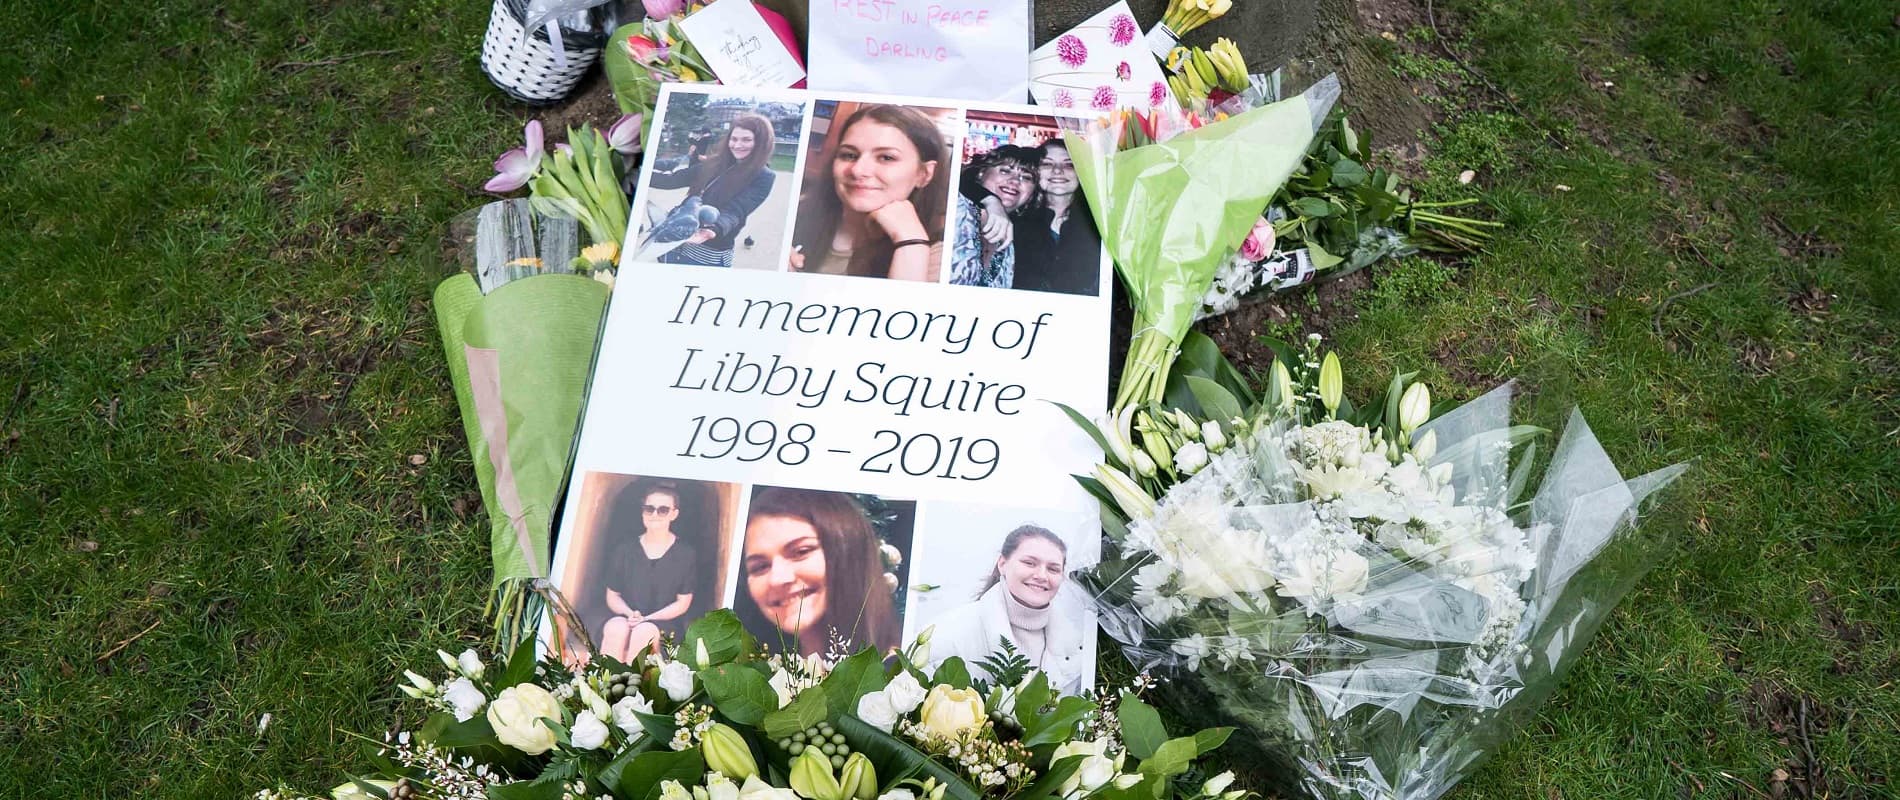 Libby Squire Memorial